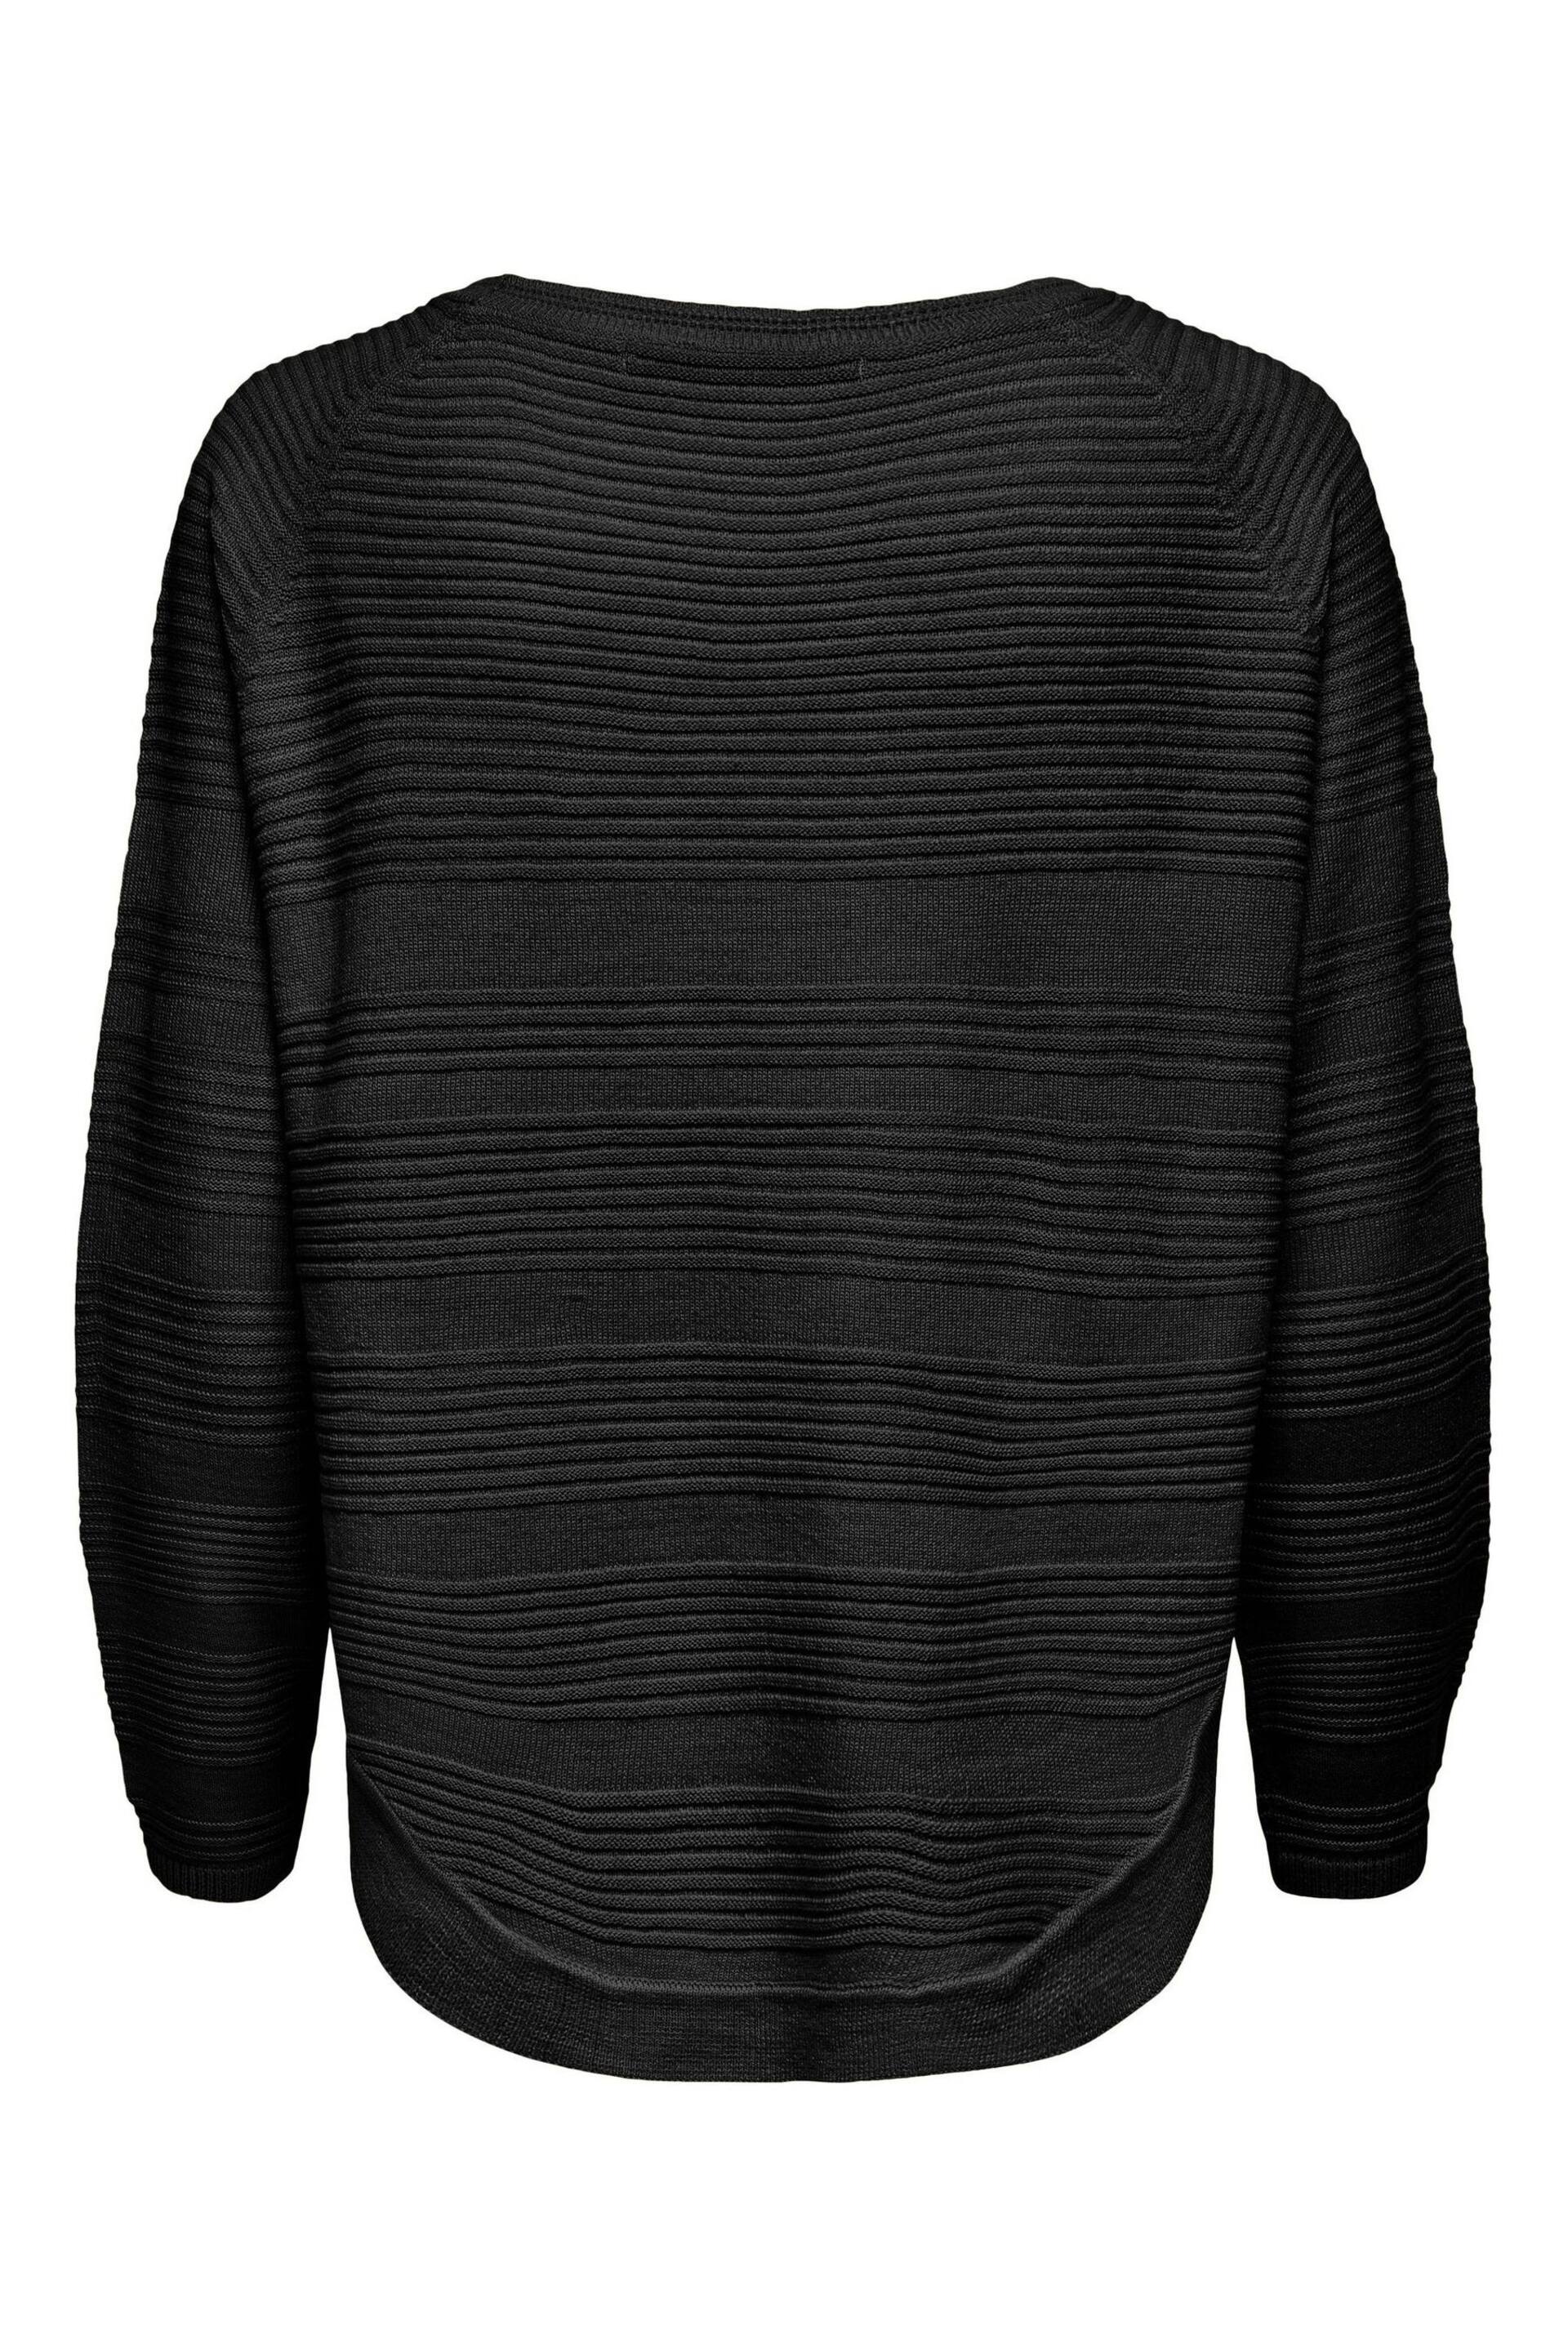 ONLY Black Textured Knitted Jumper - Image 5 of 5